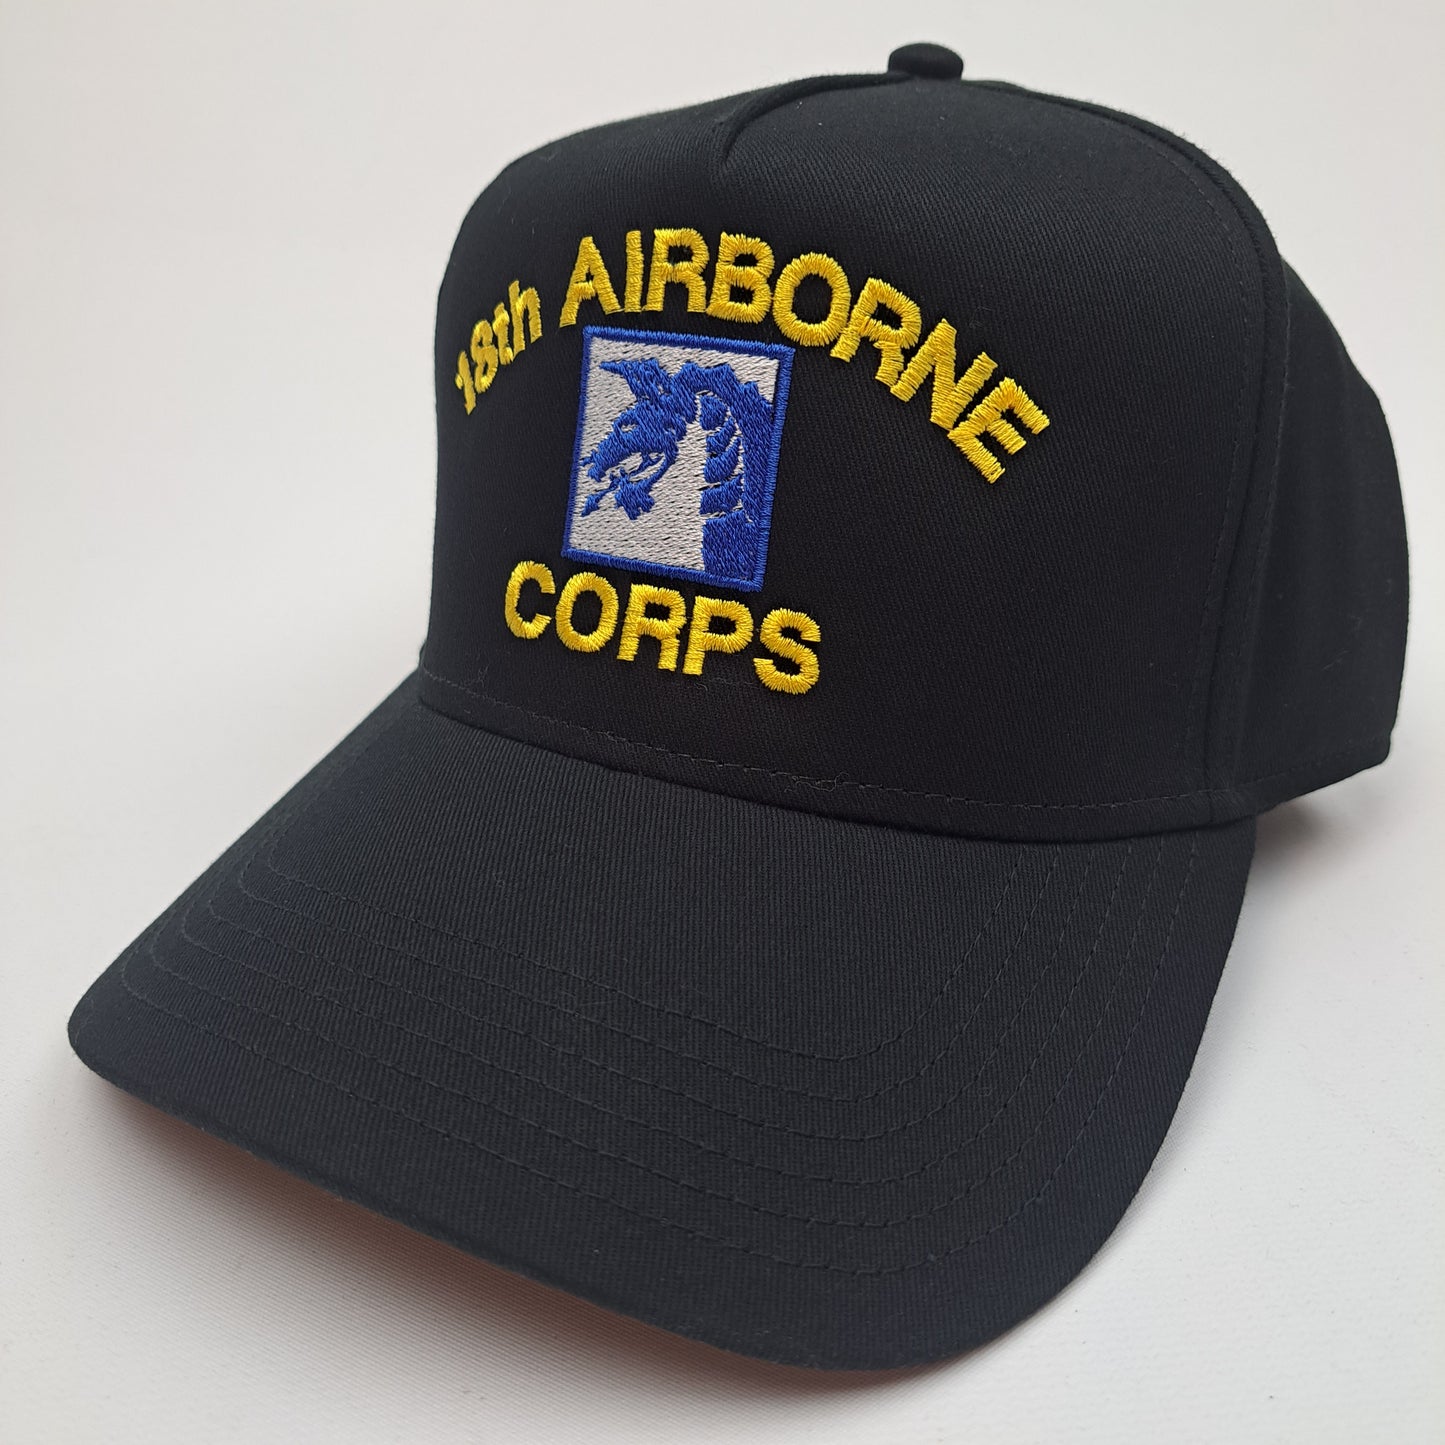 U.S. Army 18th Airborne Men's Ball Cap Hat Black Embroidered